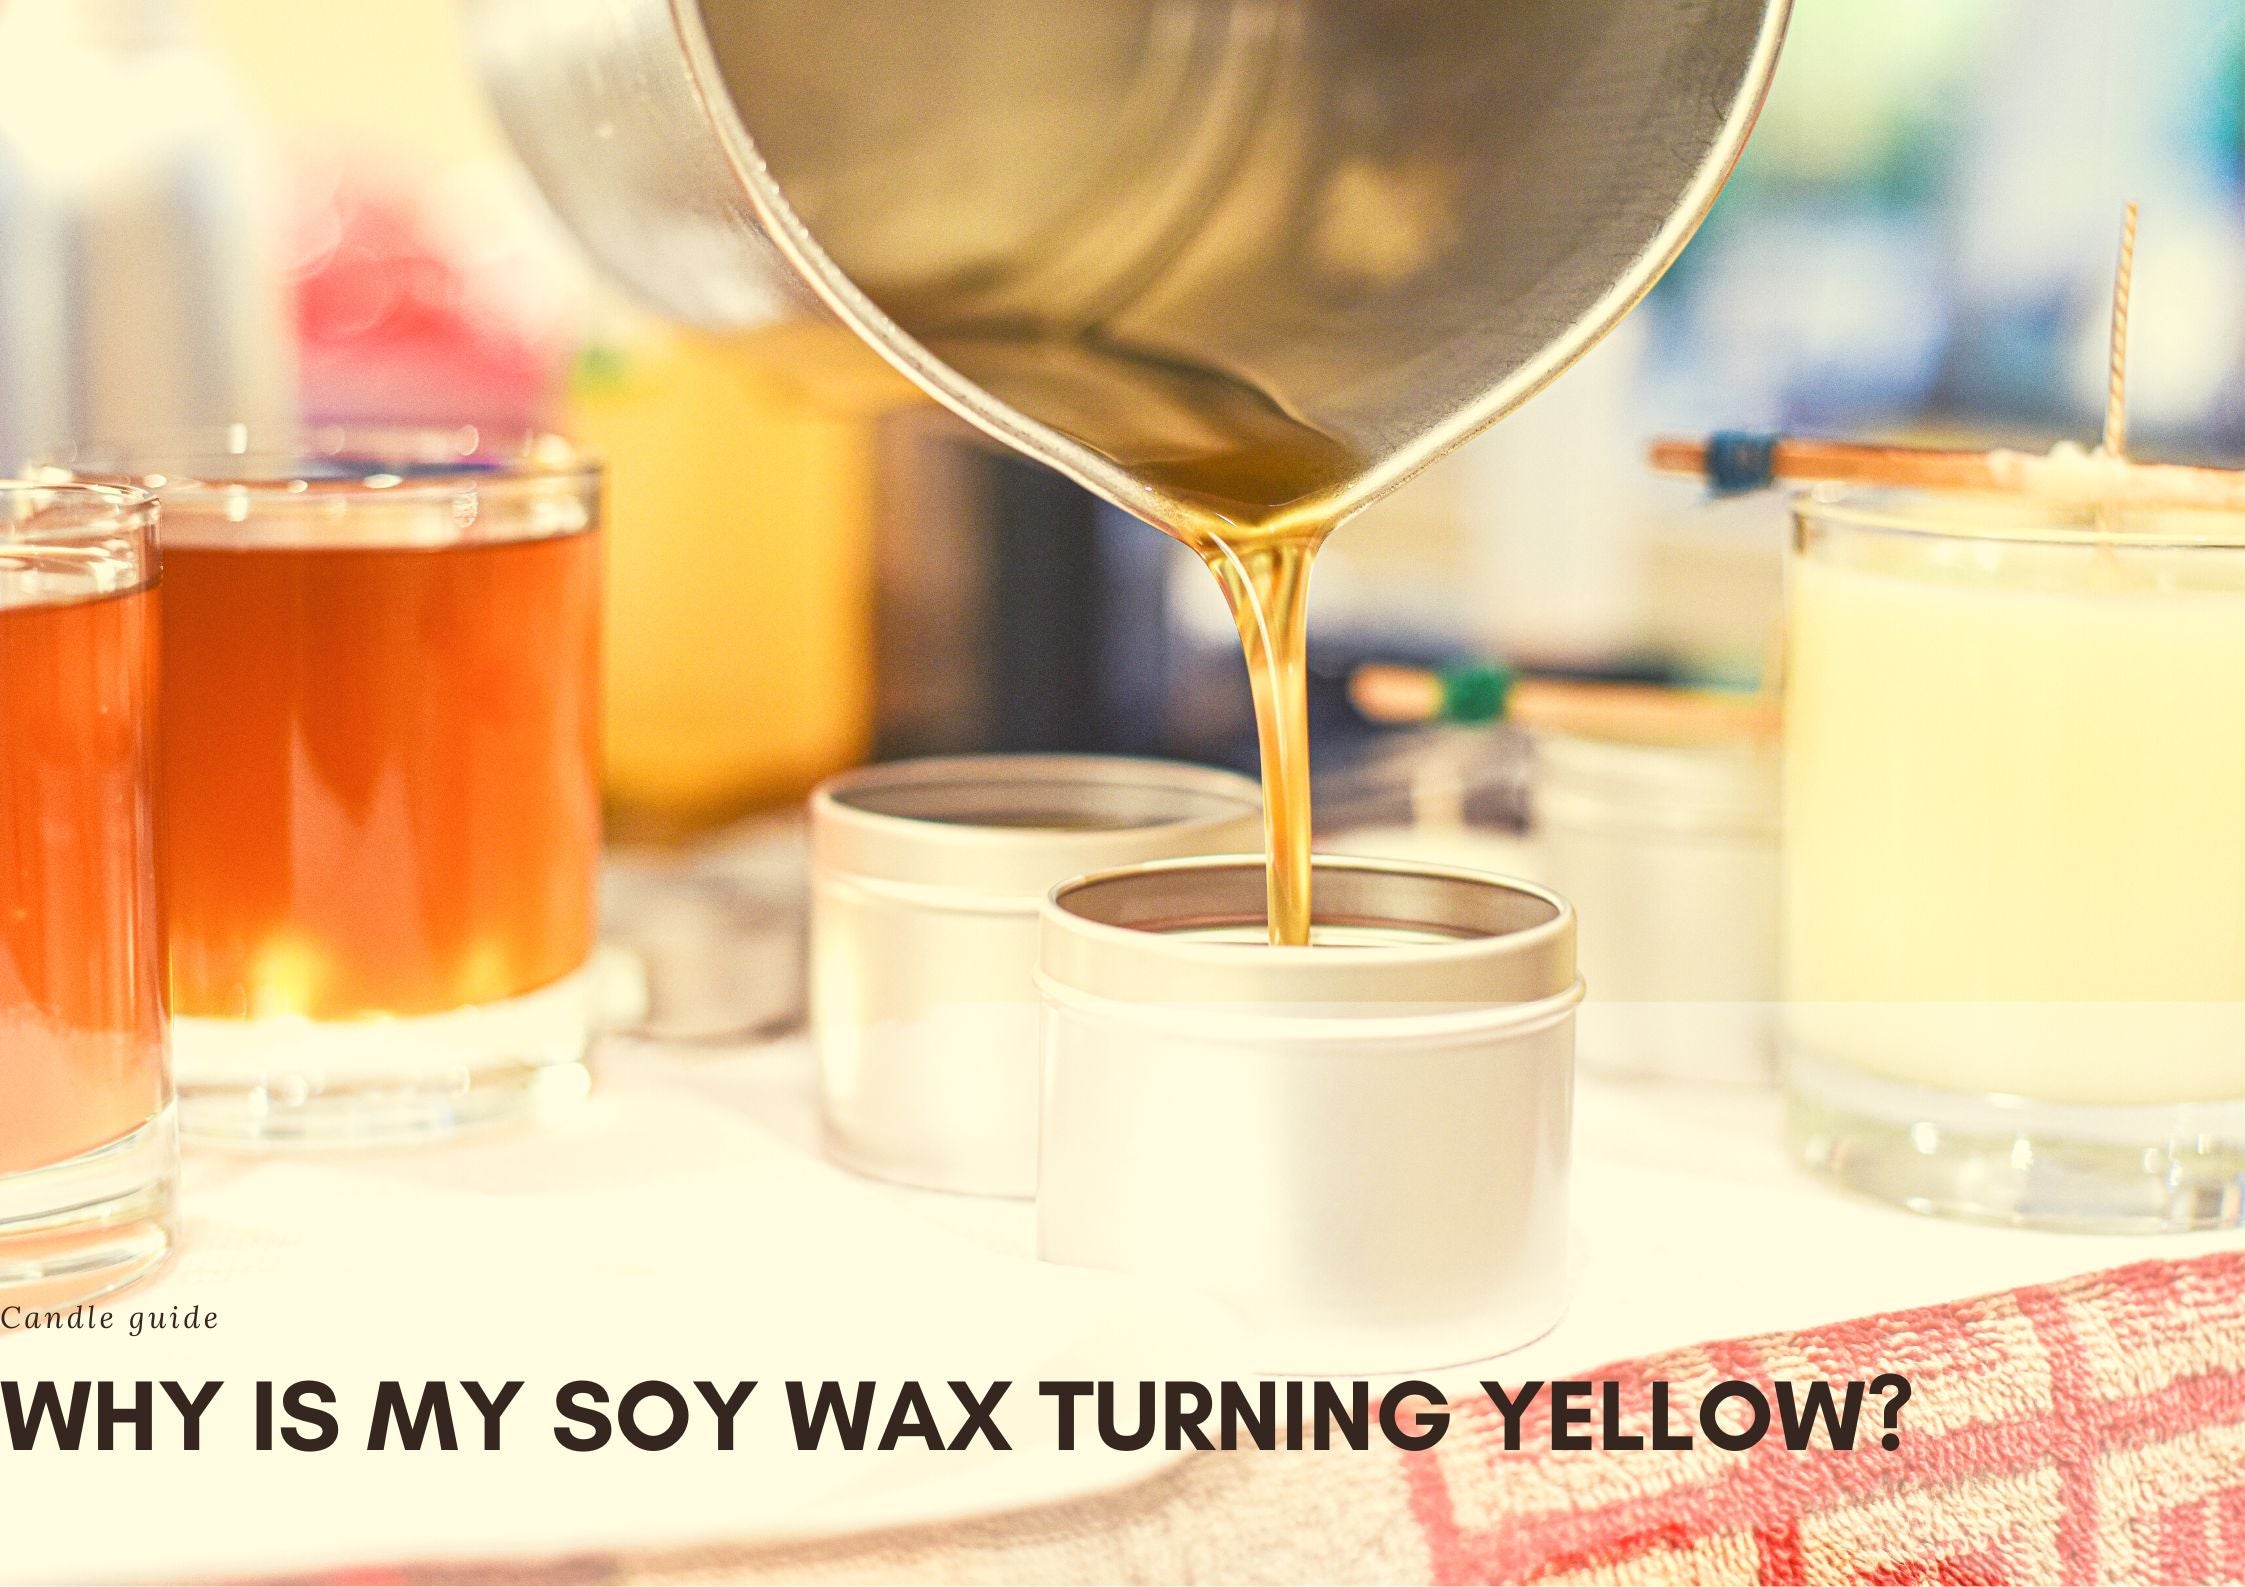 Why is my soy wax turning yellow?